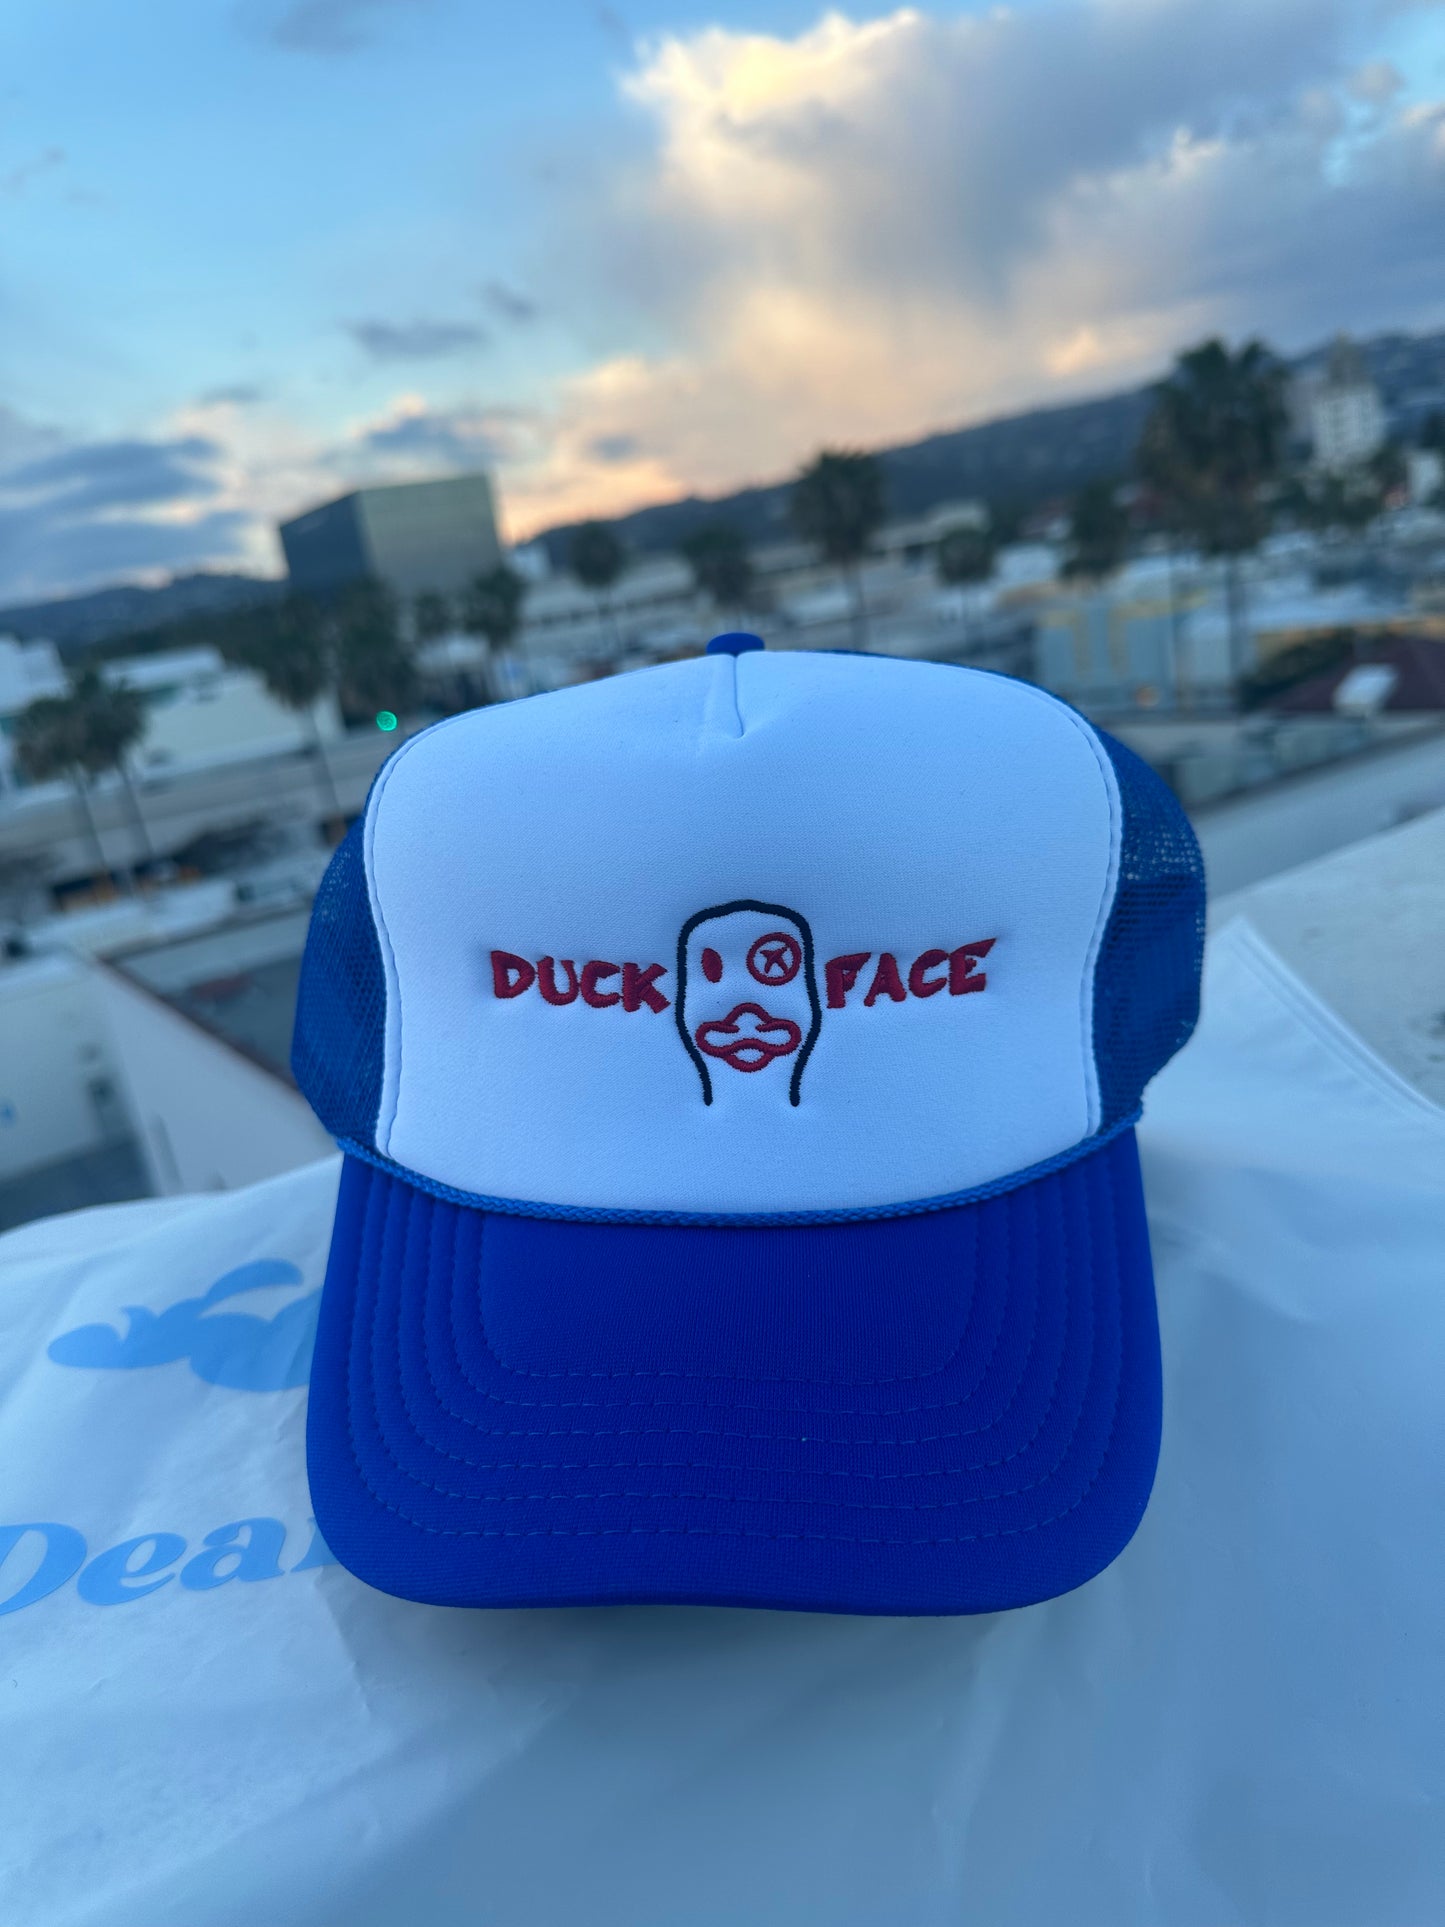 Blue and Red “Duck Face” Hat